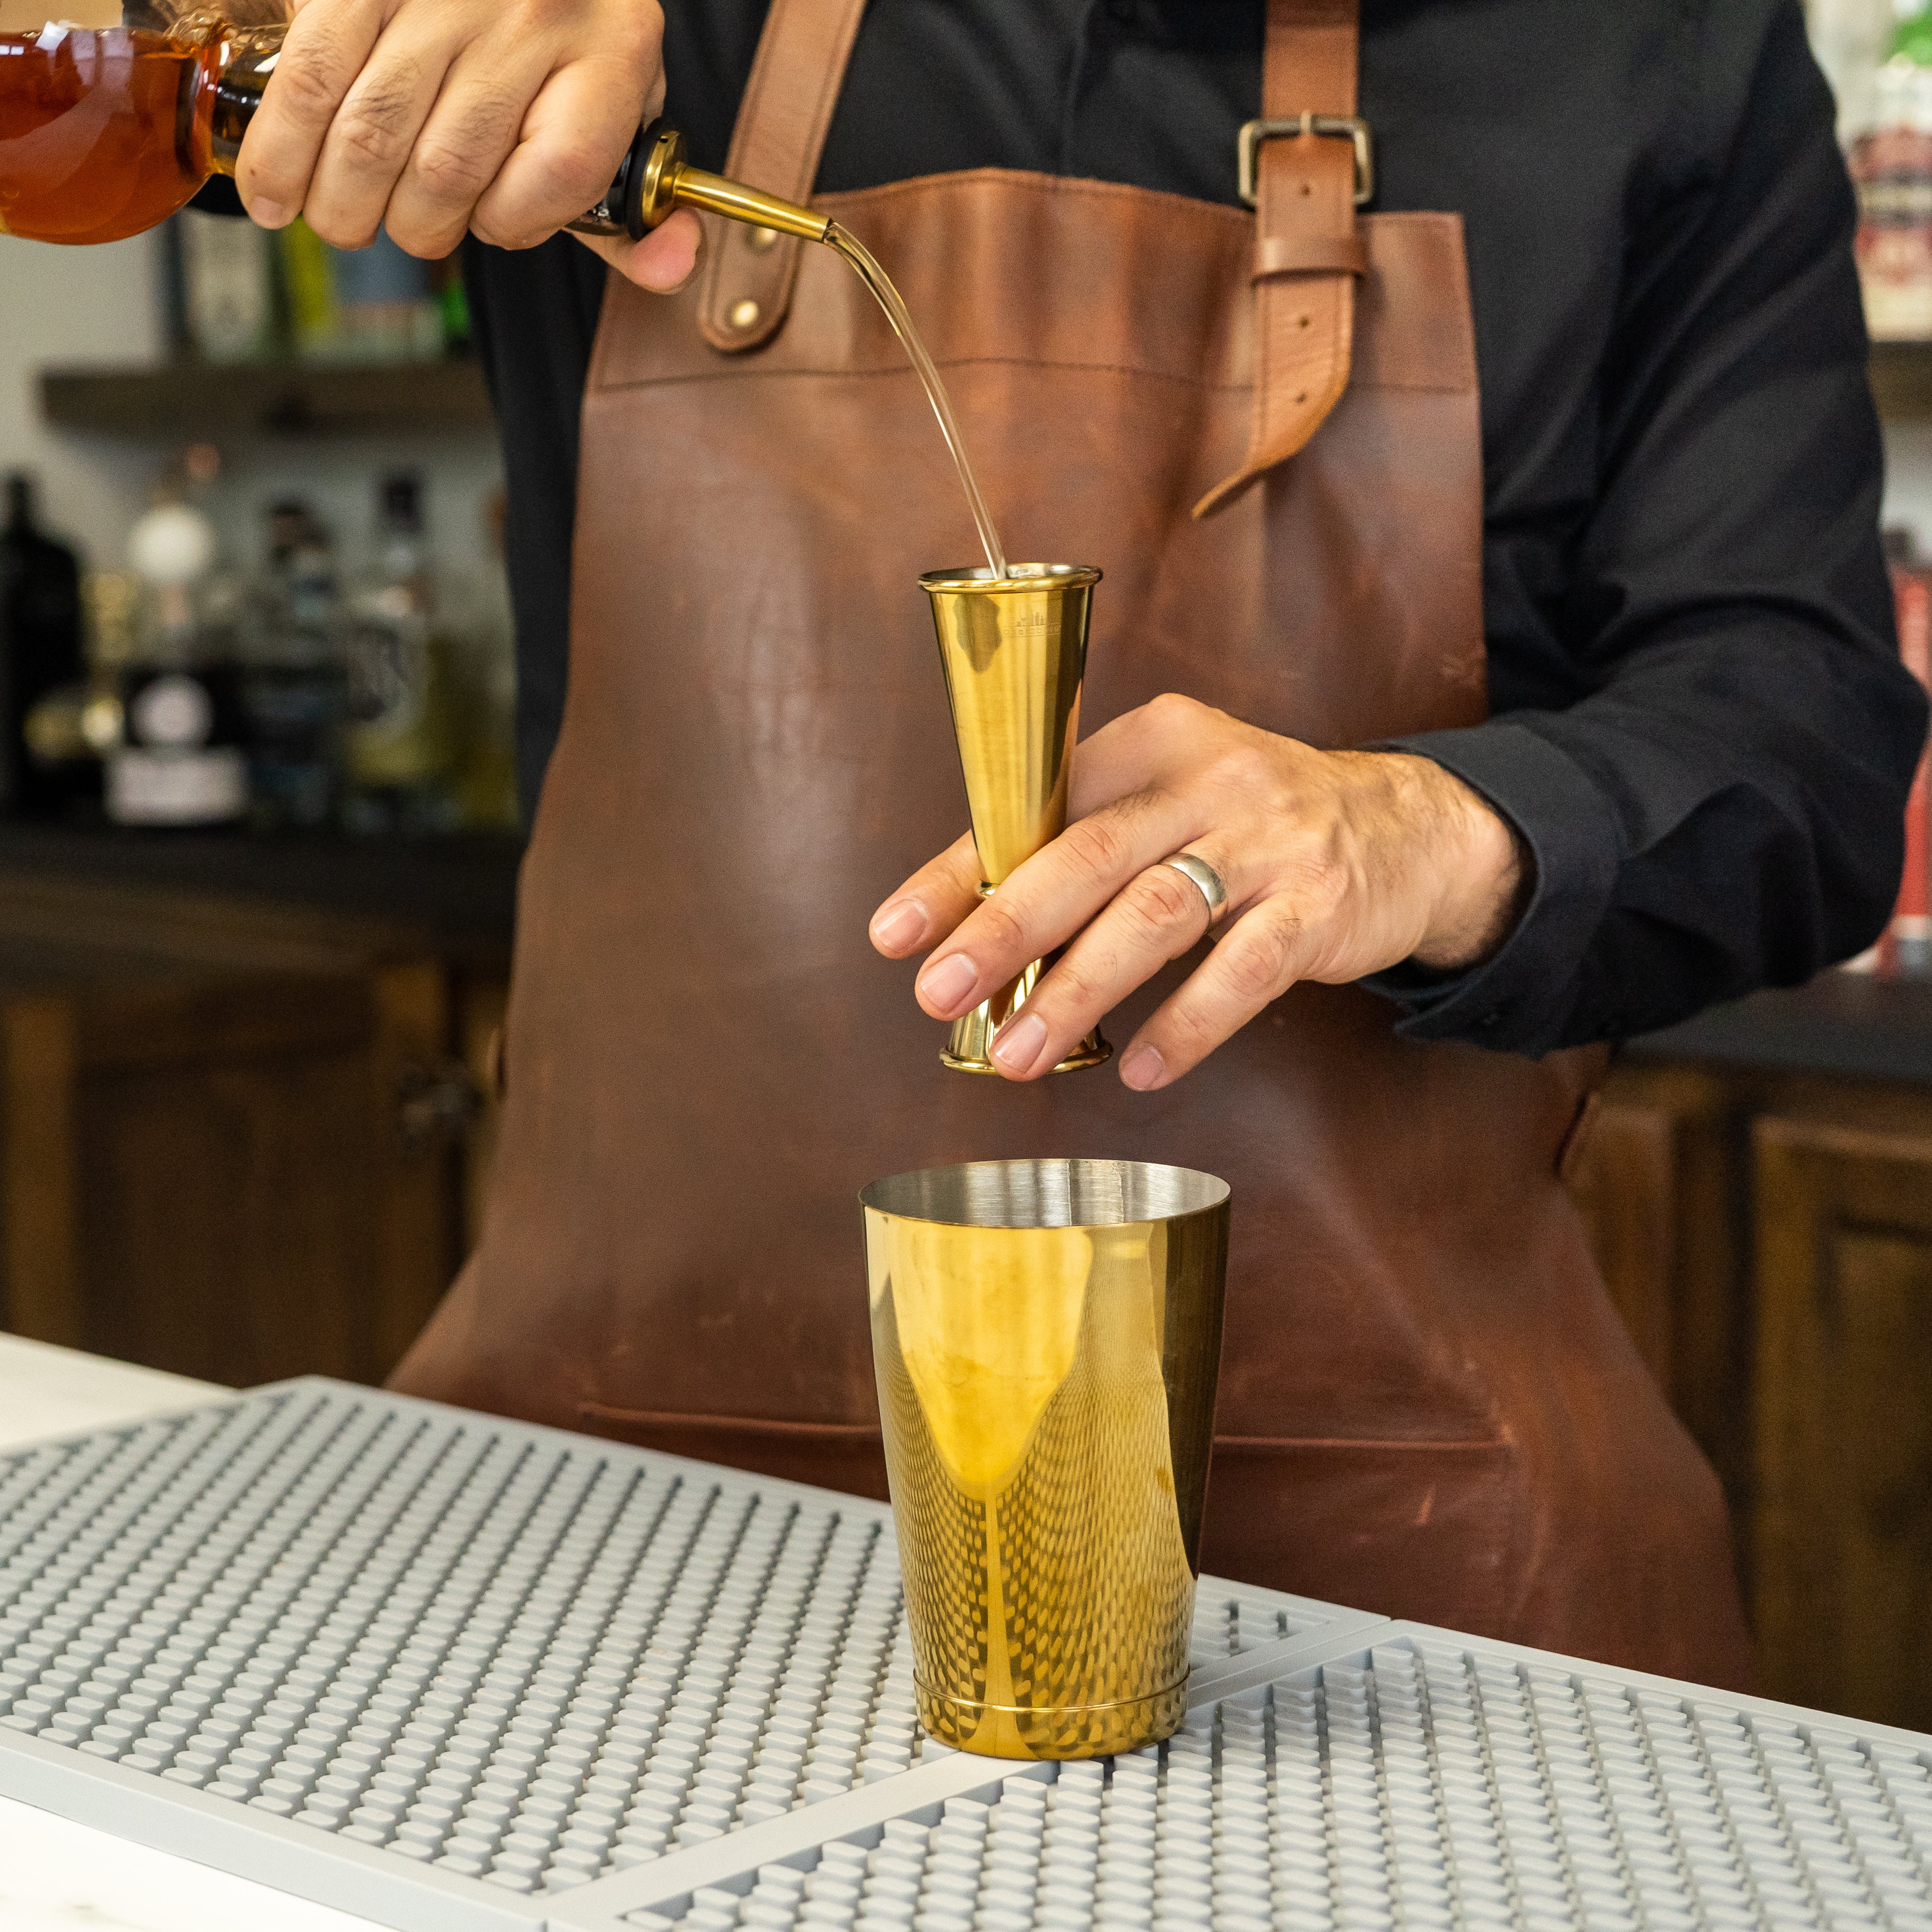 Bartender's hands pouring alcohol from a bottle with a pour spout into a gold cocktail jigger above a shaker tin